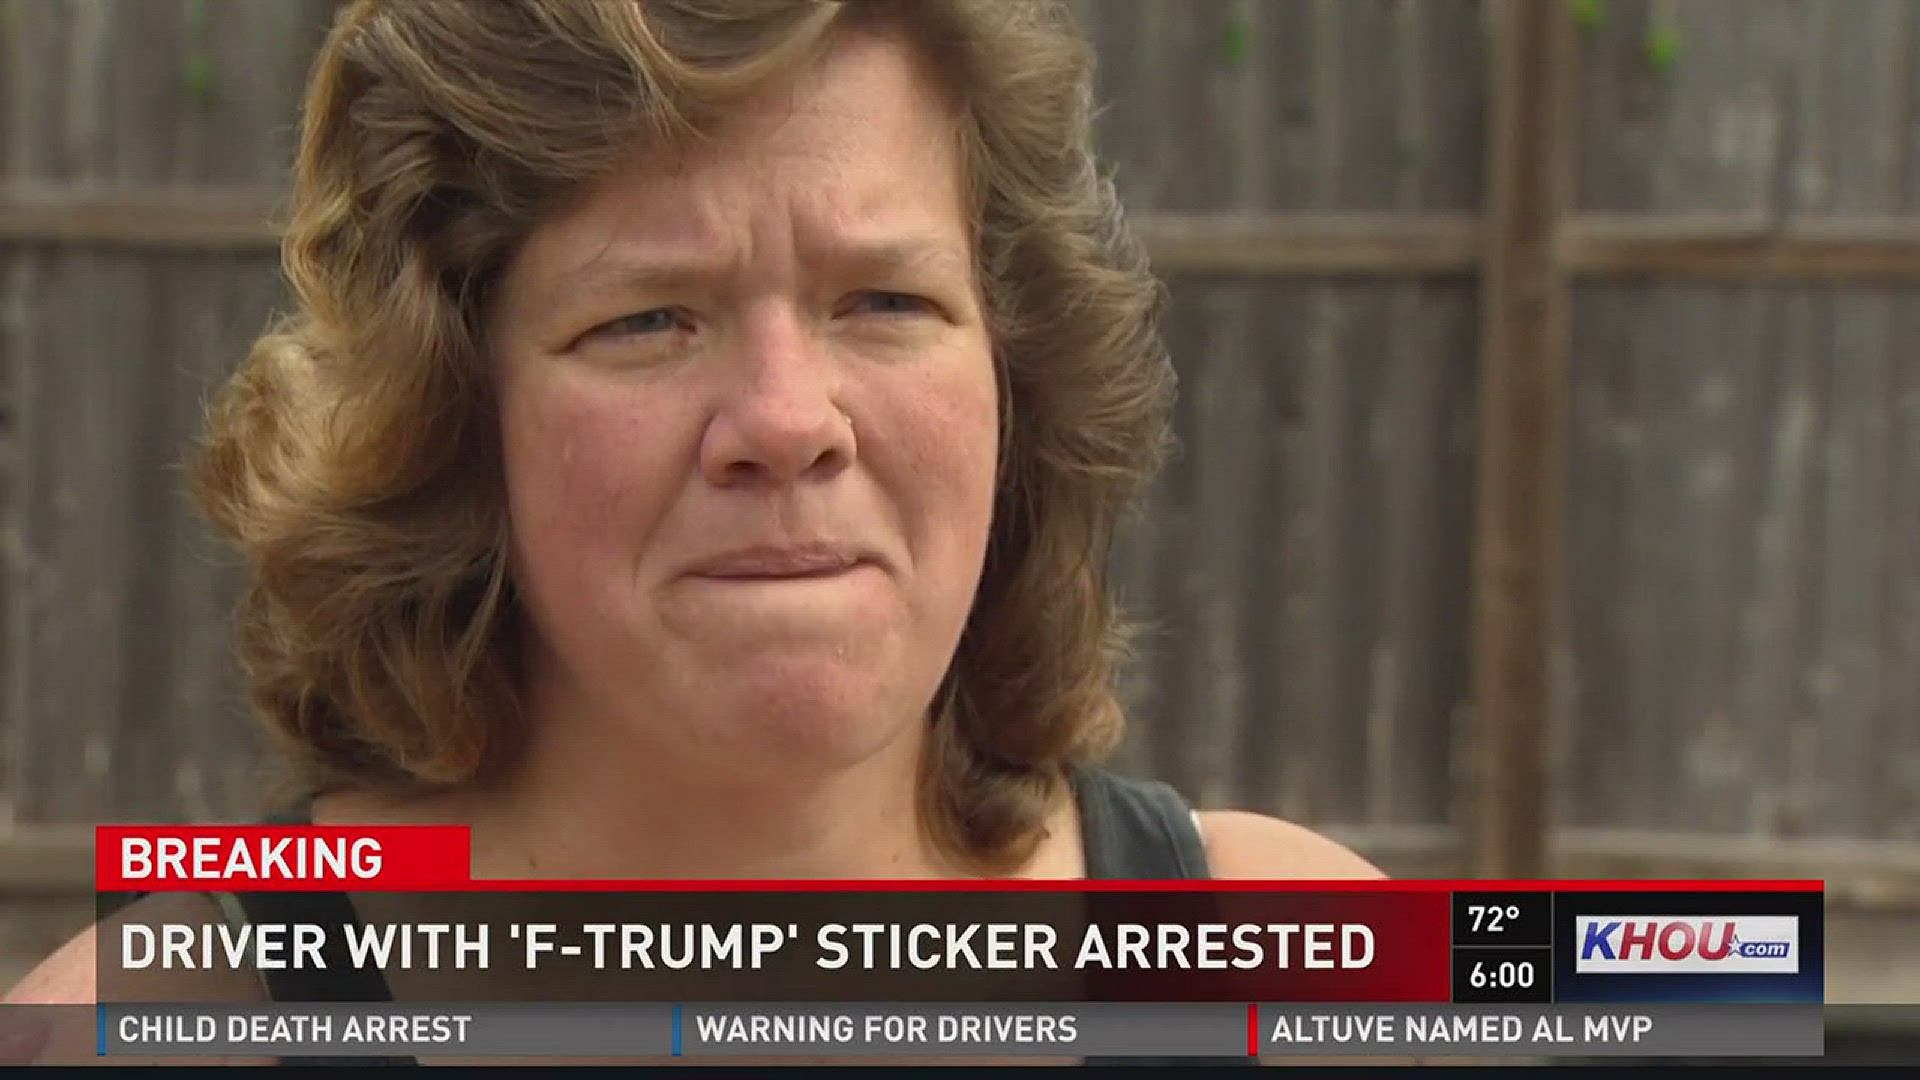 The owner of the truck with a "F__k Trump" sticker has been arrested, according to her husband. Mike Fonseca said his wife, Karen, was picked up Thursday afternoon for an outstanding warrant from August. Records show Karen Fonseca is accused of fraud. The